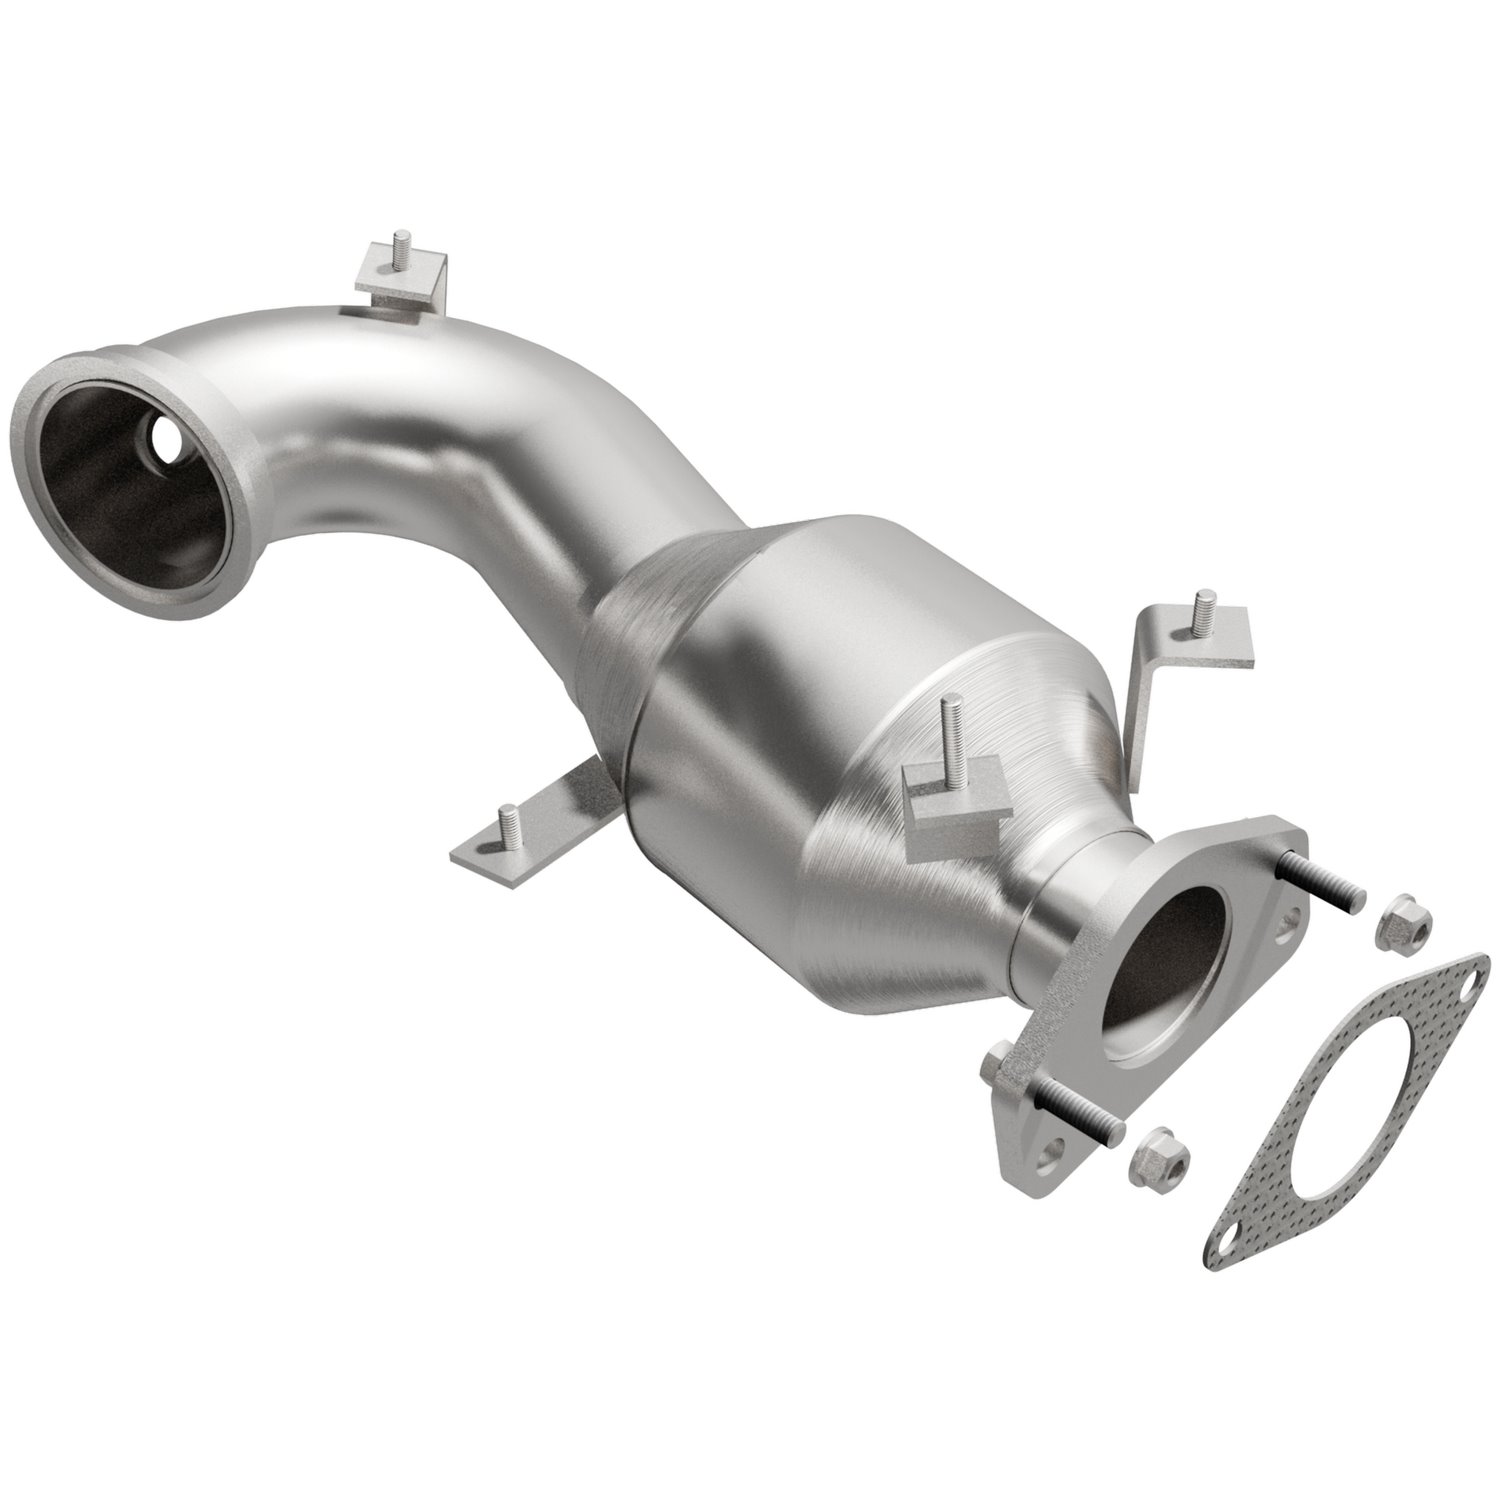 OEM Grade Federal / EPA Compliant Direct-Fit Catalytic Converter 21-697